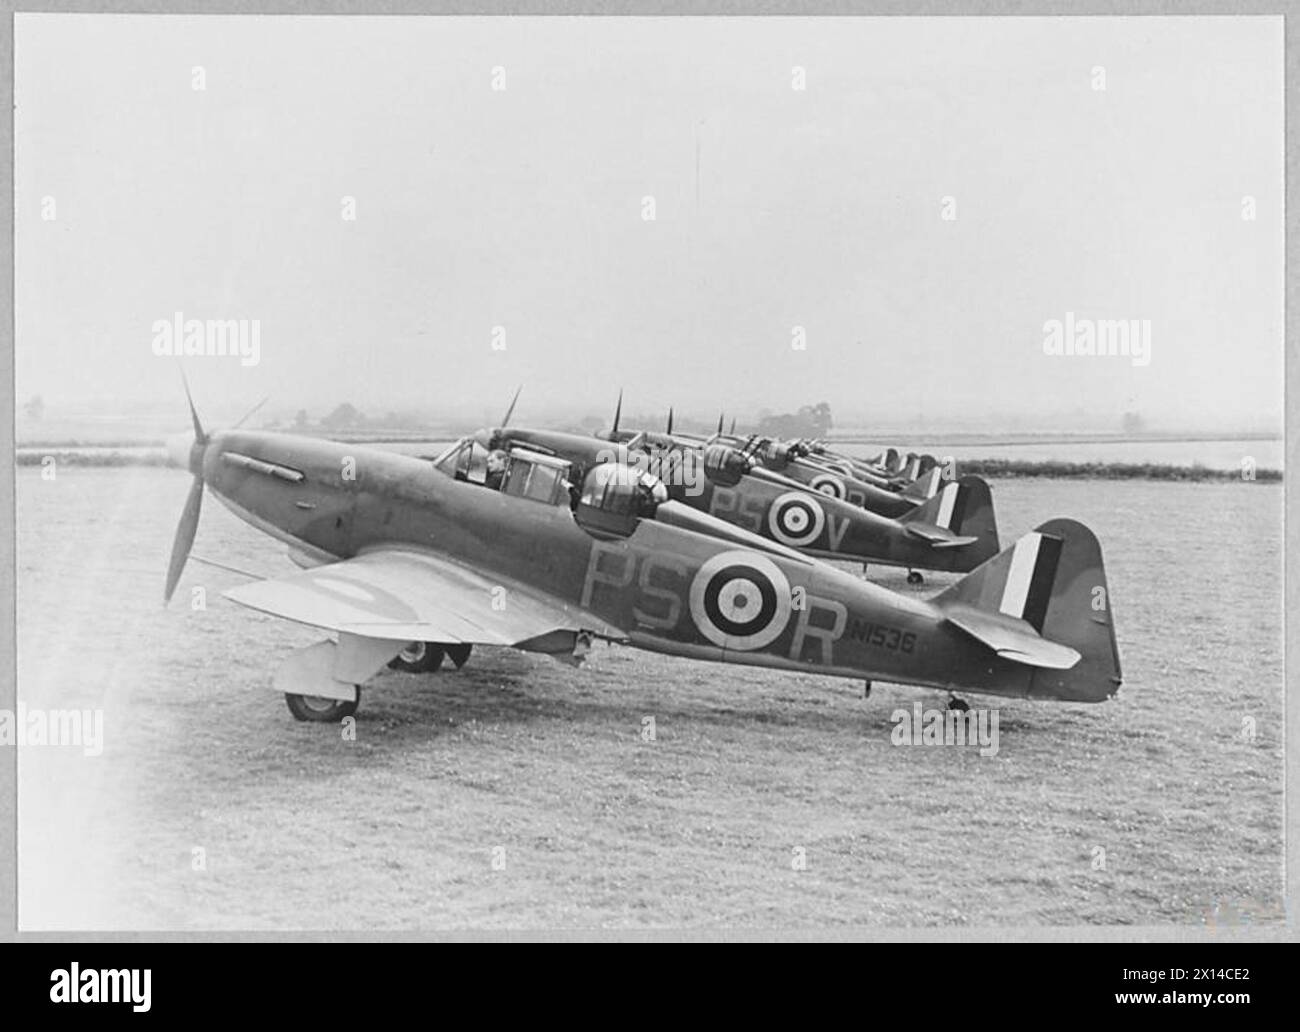 THE BATTLE OF BRITAIN 1940 - Boulton Paul Defiants of No. 264 Squadron, Kirton in Lindsey, Lincolnshire, August 1940. N1536 PS-R nearest, with L7026 PS-V and L6967 PS-P behind Royal Air Force Stock Photo